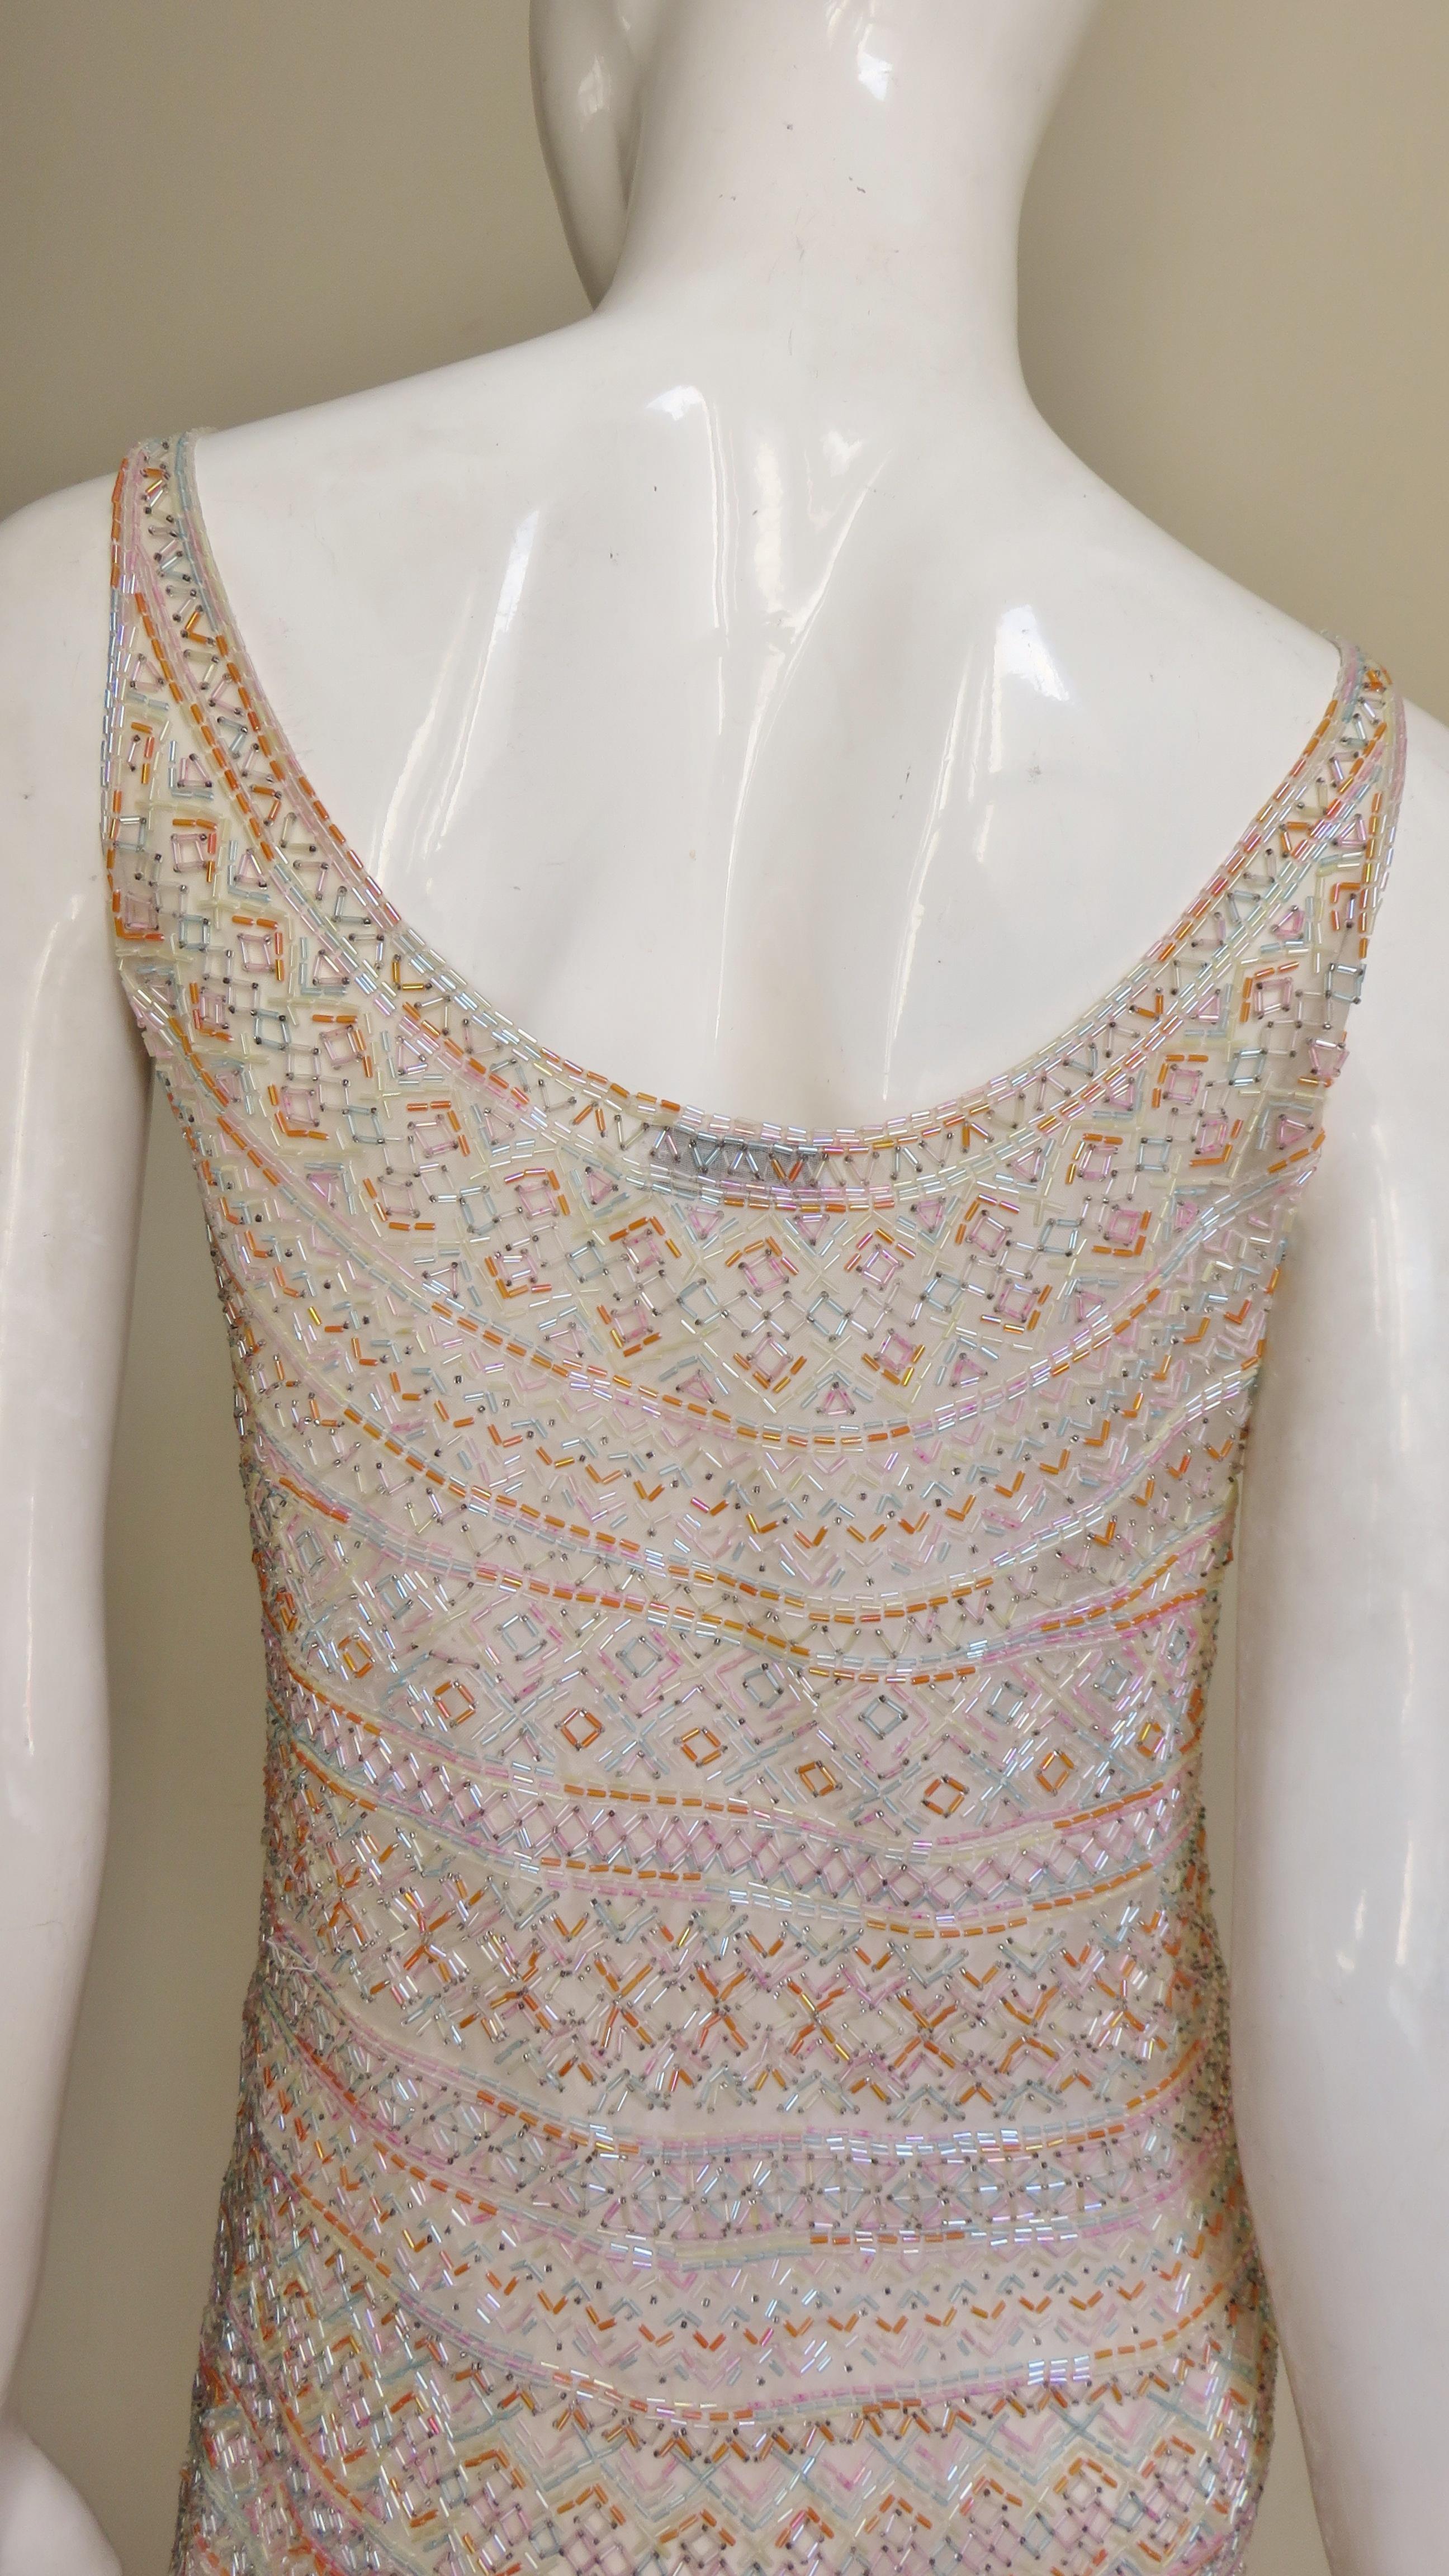  Halston 1970s Documented Beaded Dress  For Sale 5